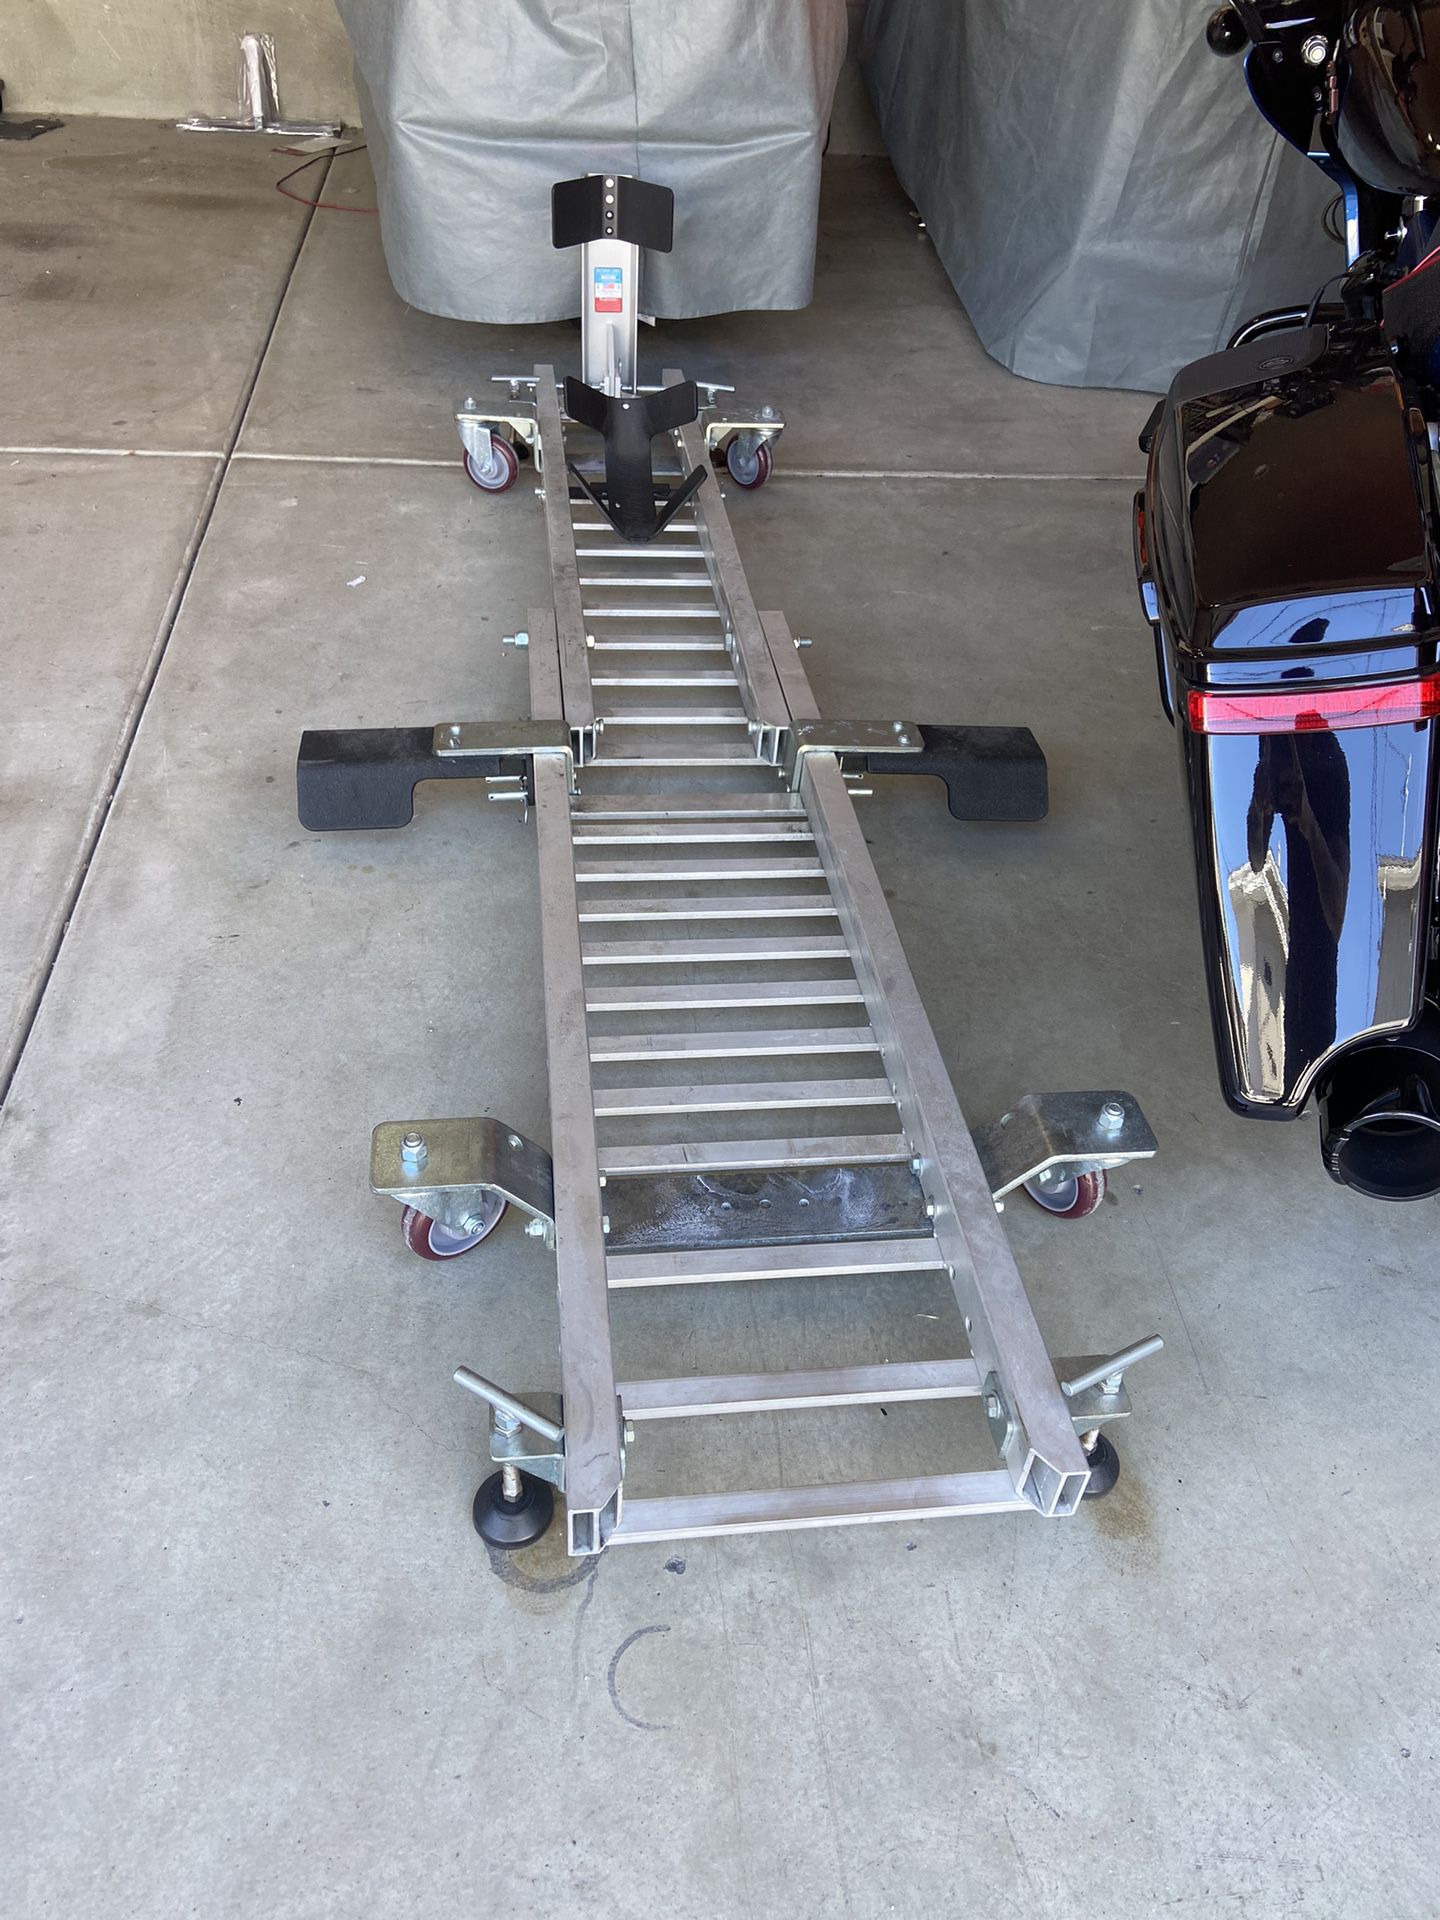 Motorcycle Garage Dolly (Part #: GD-3500) 